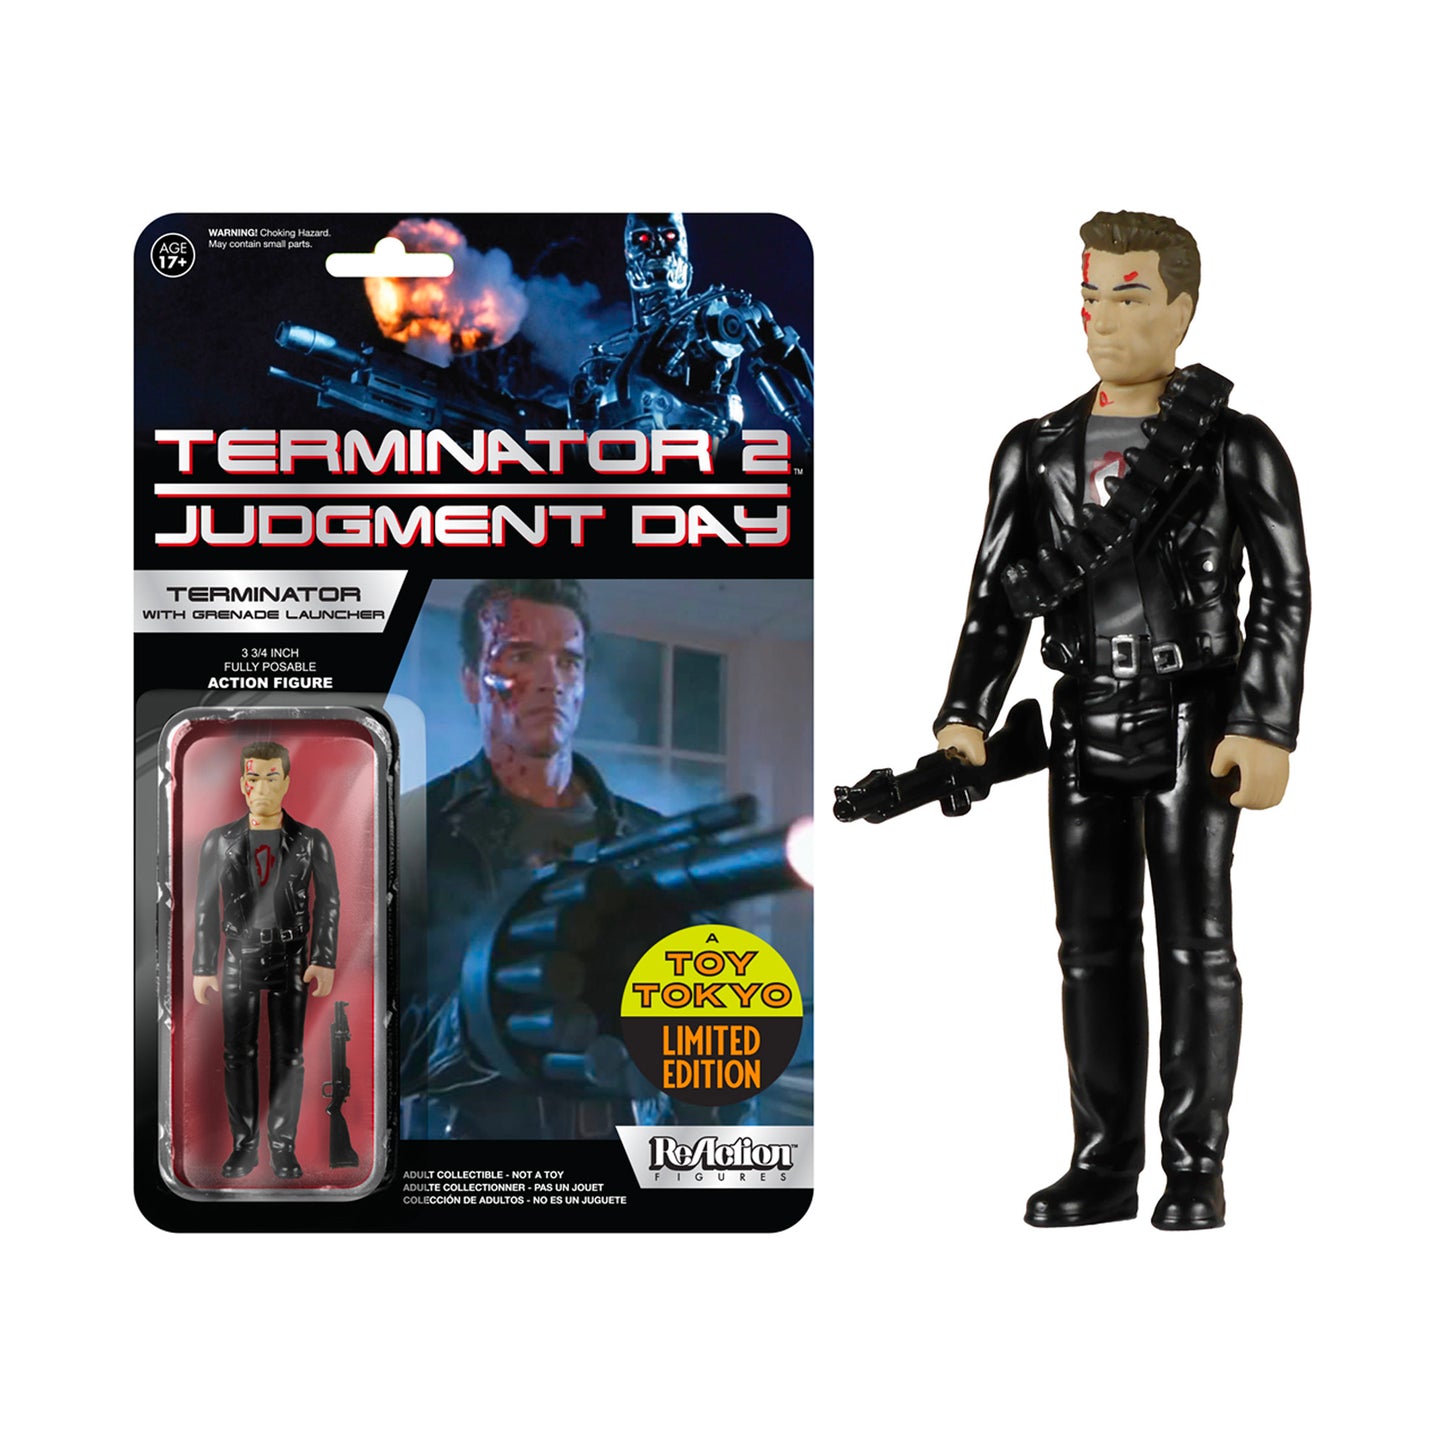 Funko x Super7: ReAction - Terminator 2 Judgment Day - Terminator with Grenade Launcher SDCC 2015 Action FIgure Toy Tokyo Exclusive